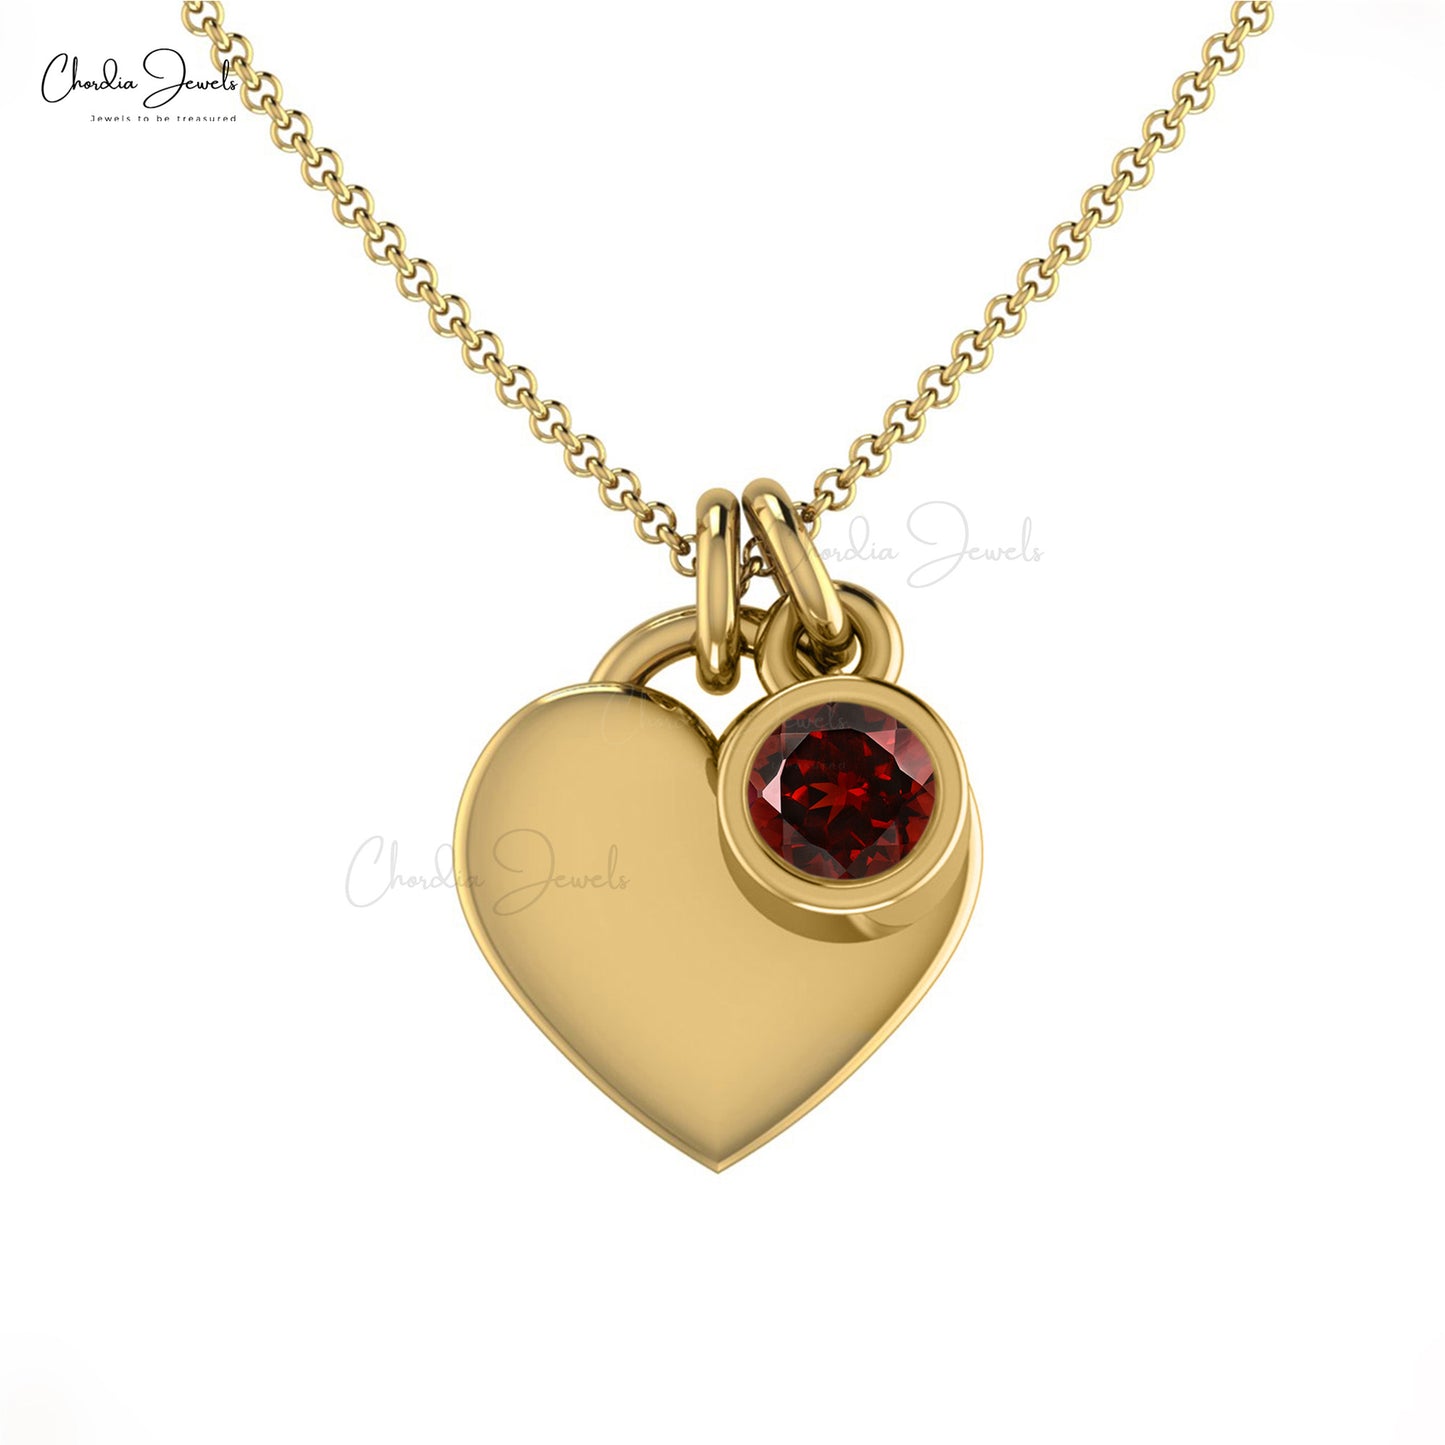 Load image into Gallery viewer, Solid 14k Gold Heart Charm Necklace with Bezel Set Solitaire Garnet
